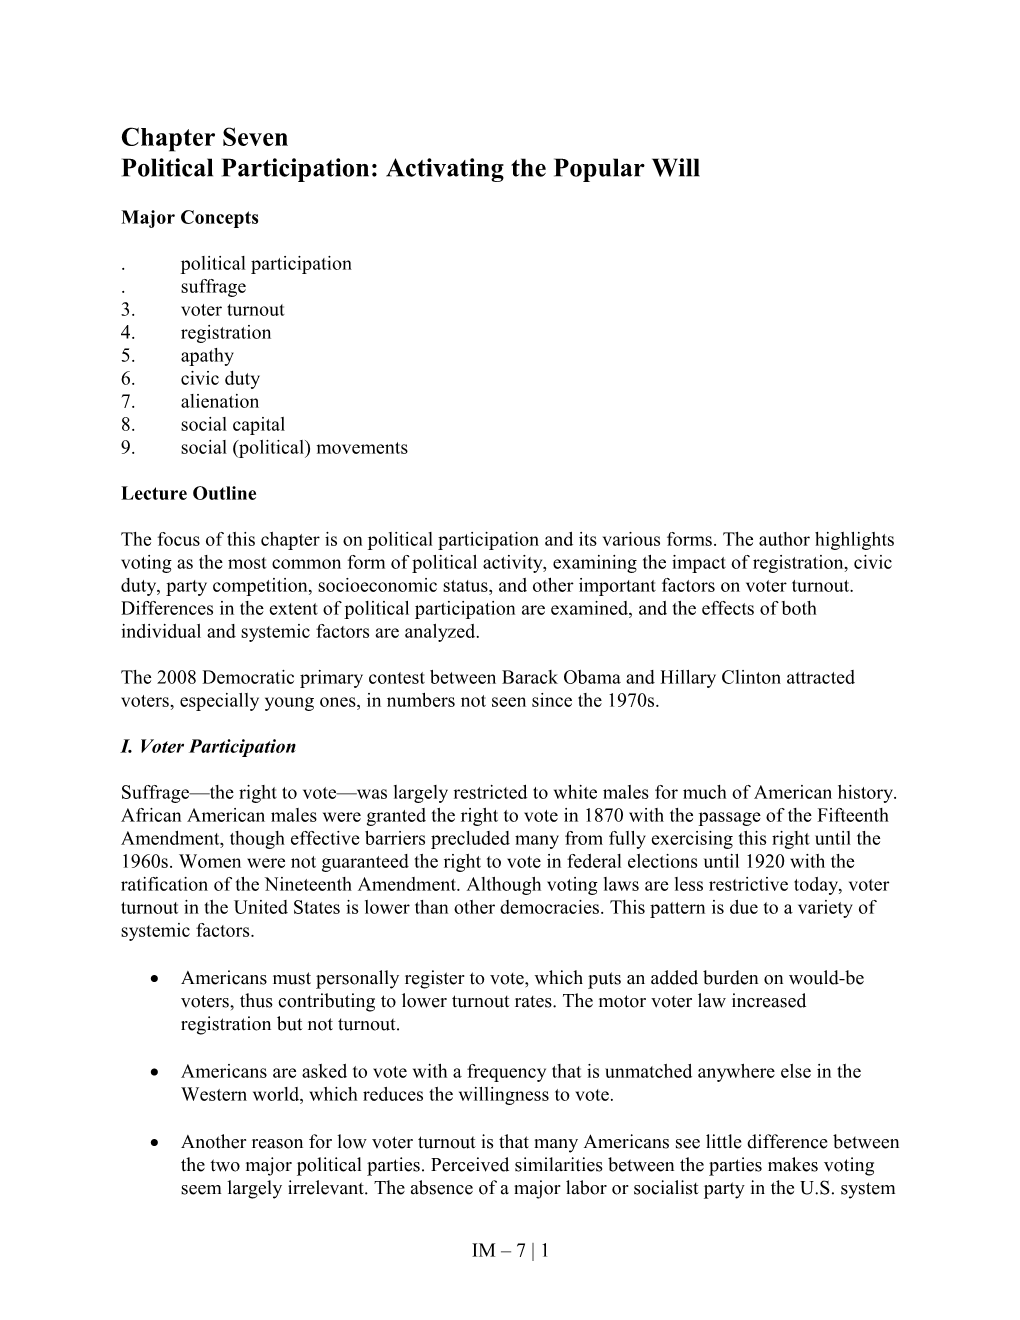 Political Participation: Activating the Popular Will